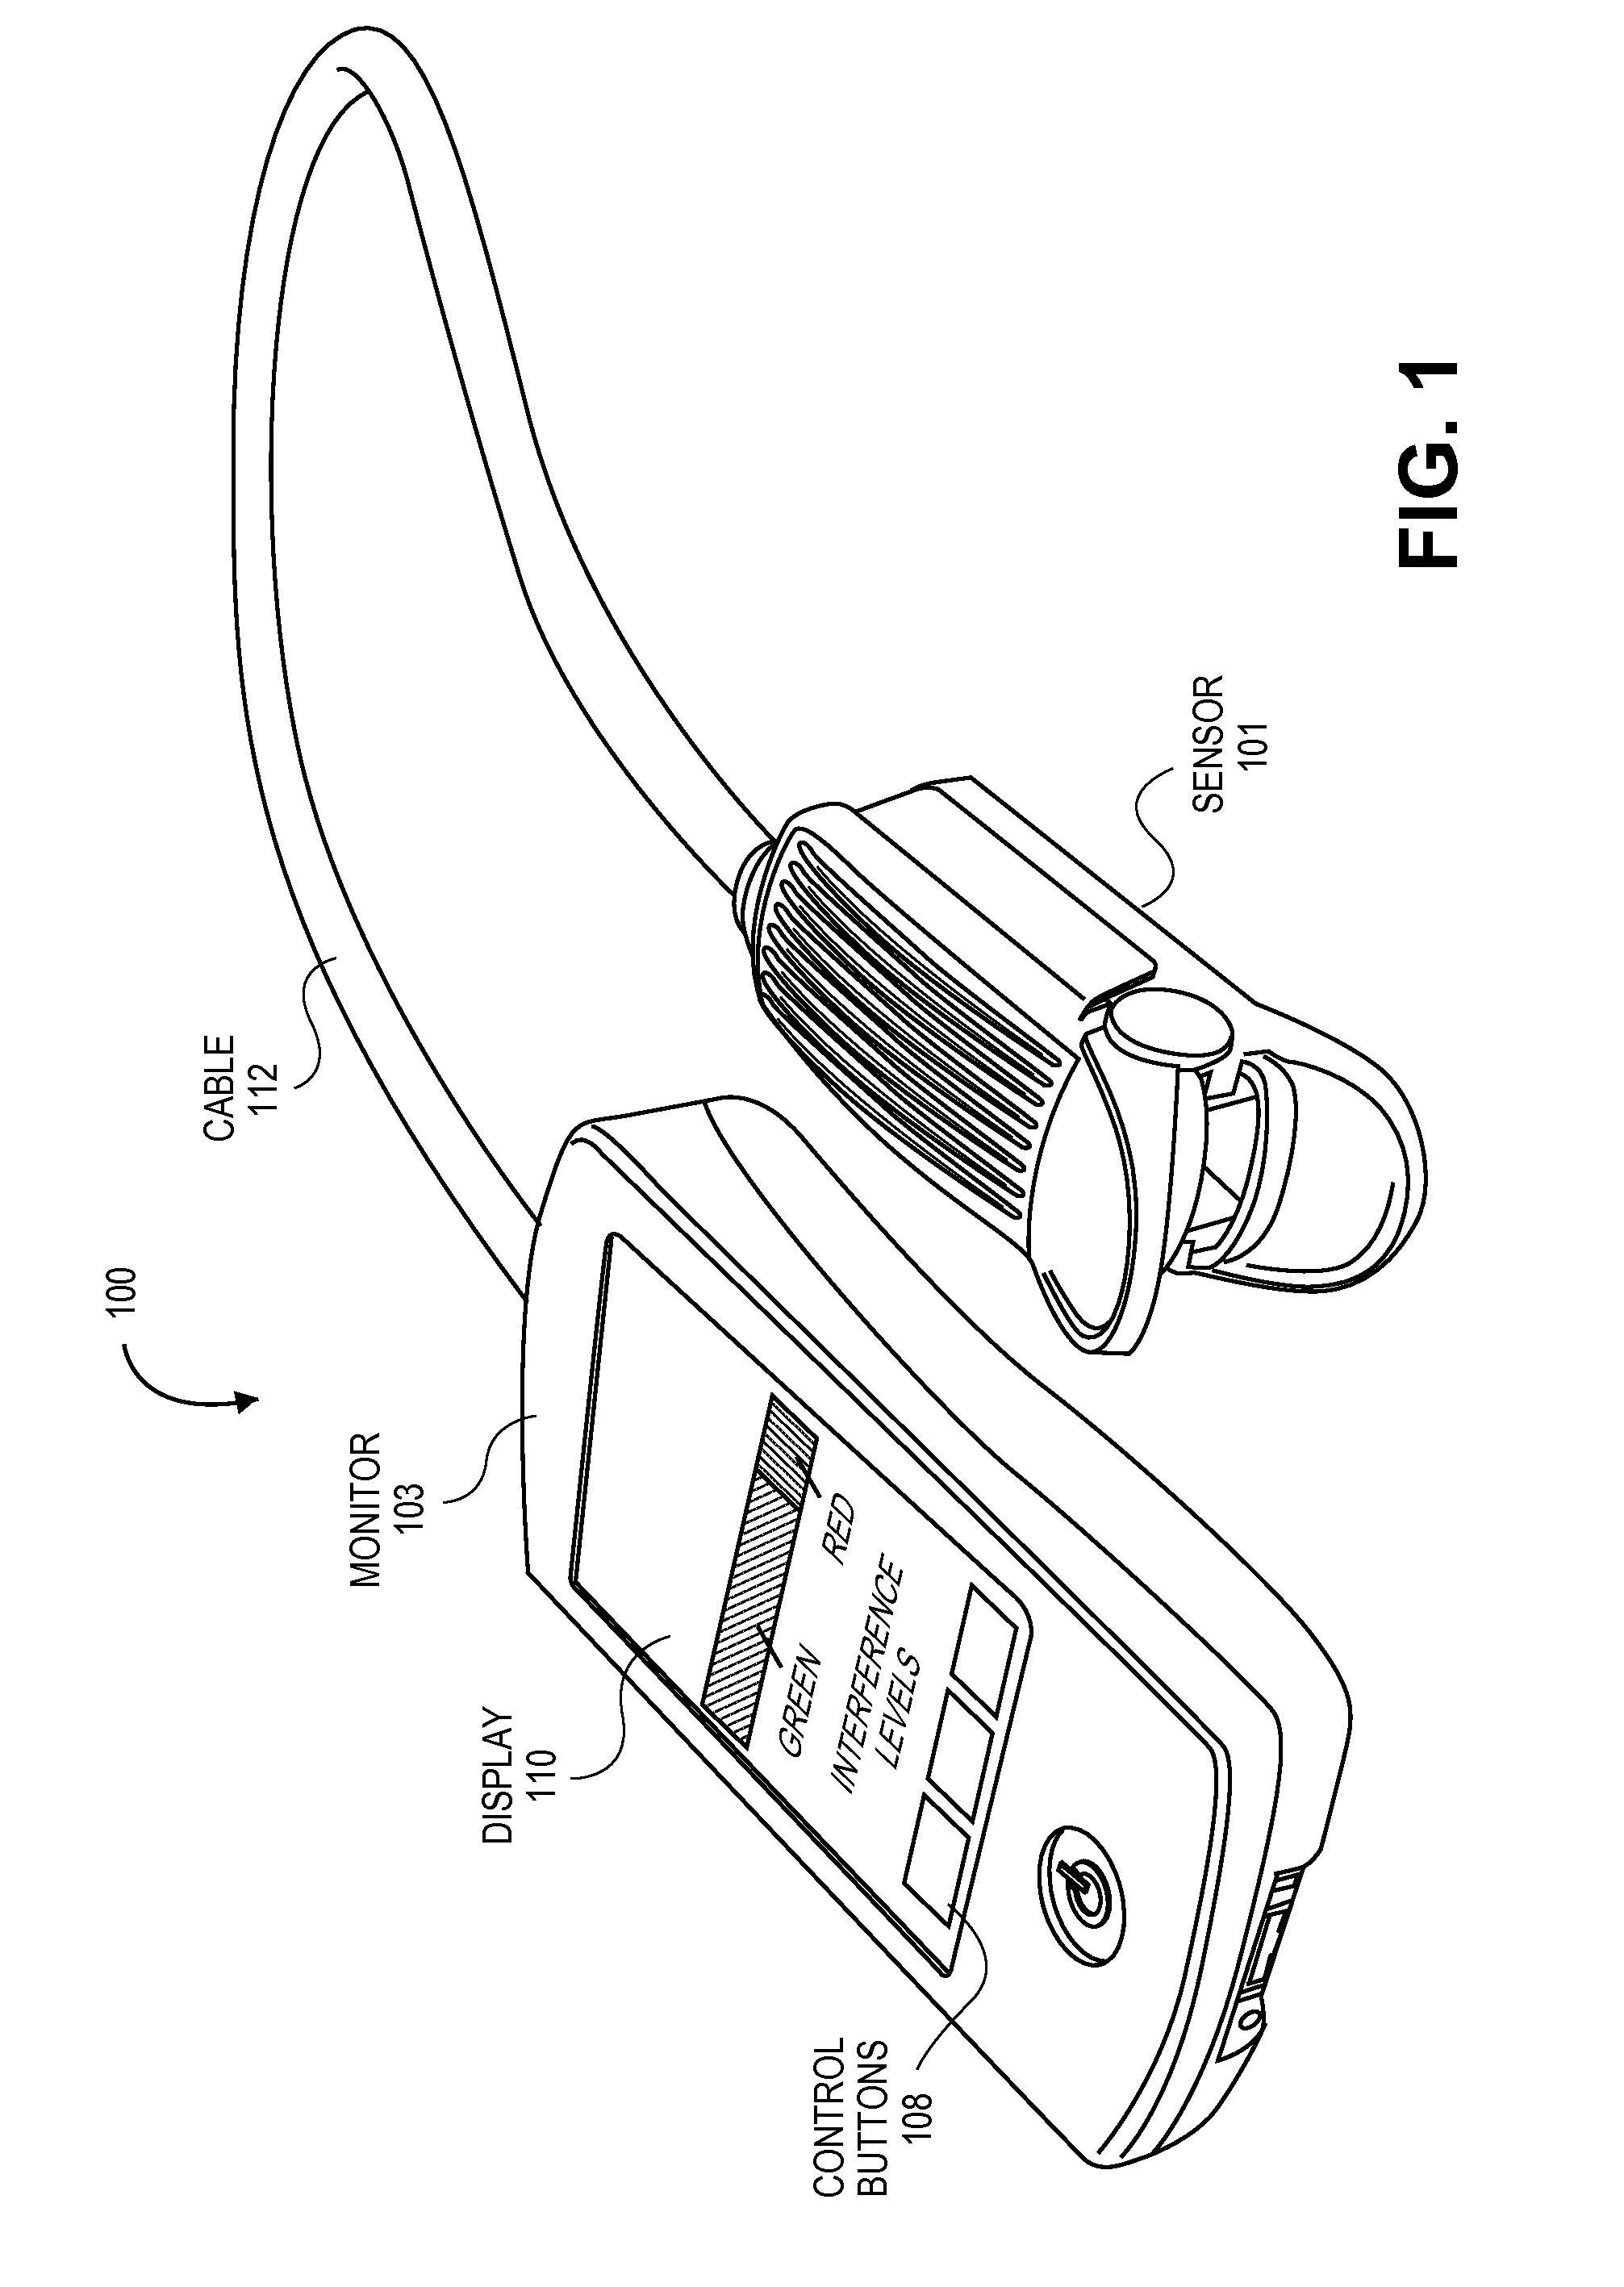 Interference detector for patient monitor